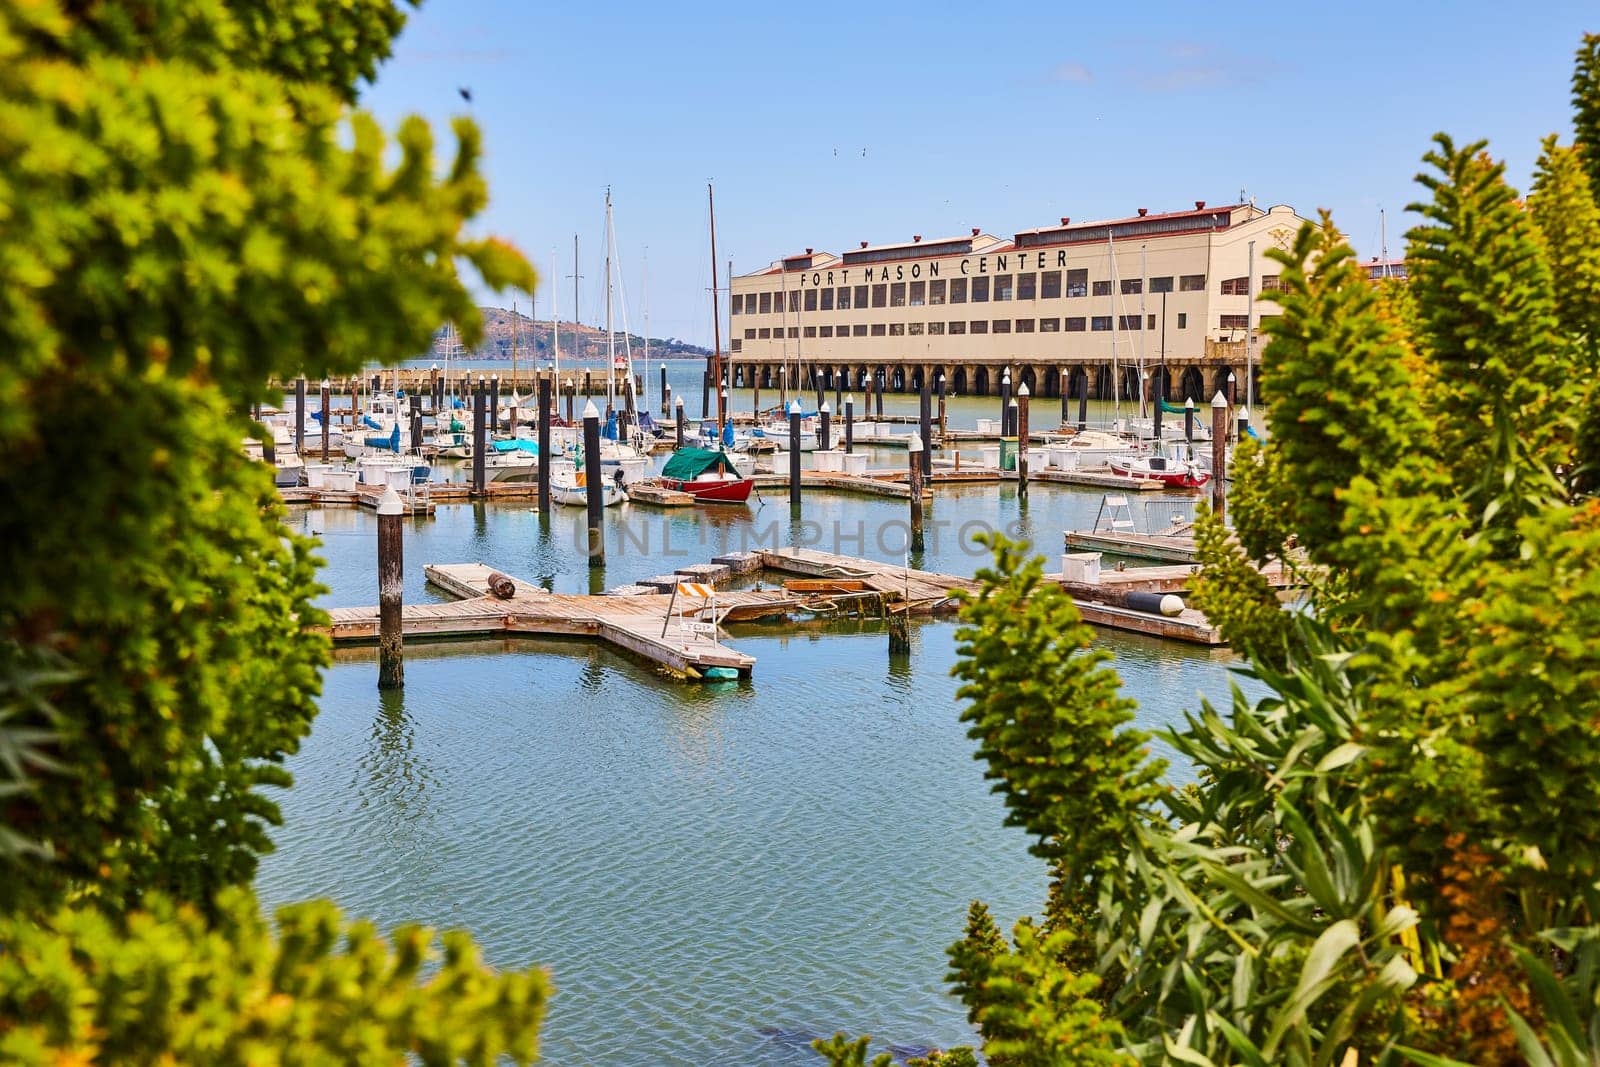 Image of Docking area with boats at Fort Mason Center on calm summer morning framed in by succulents